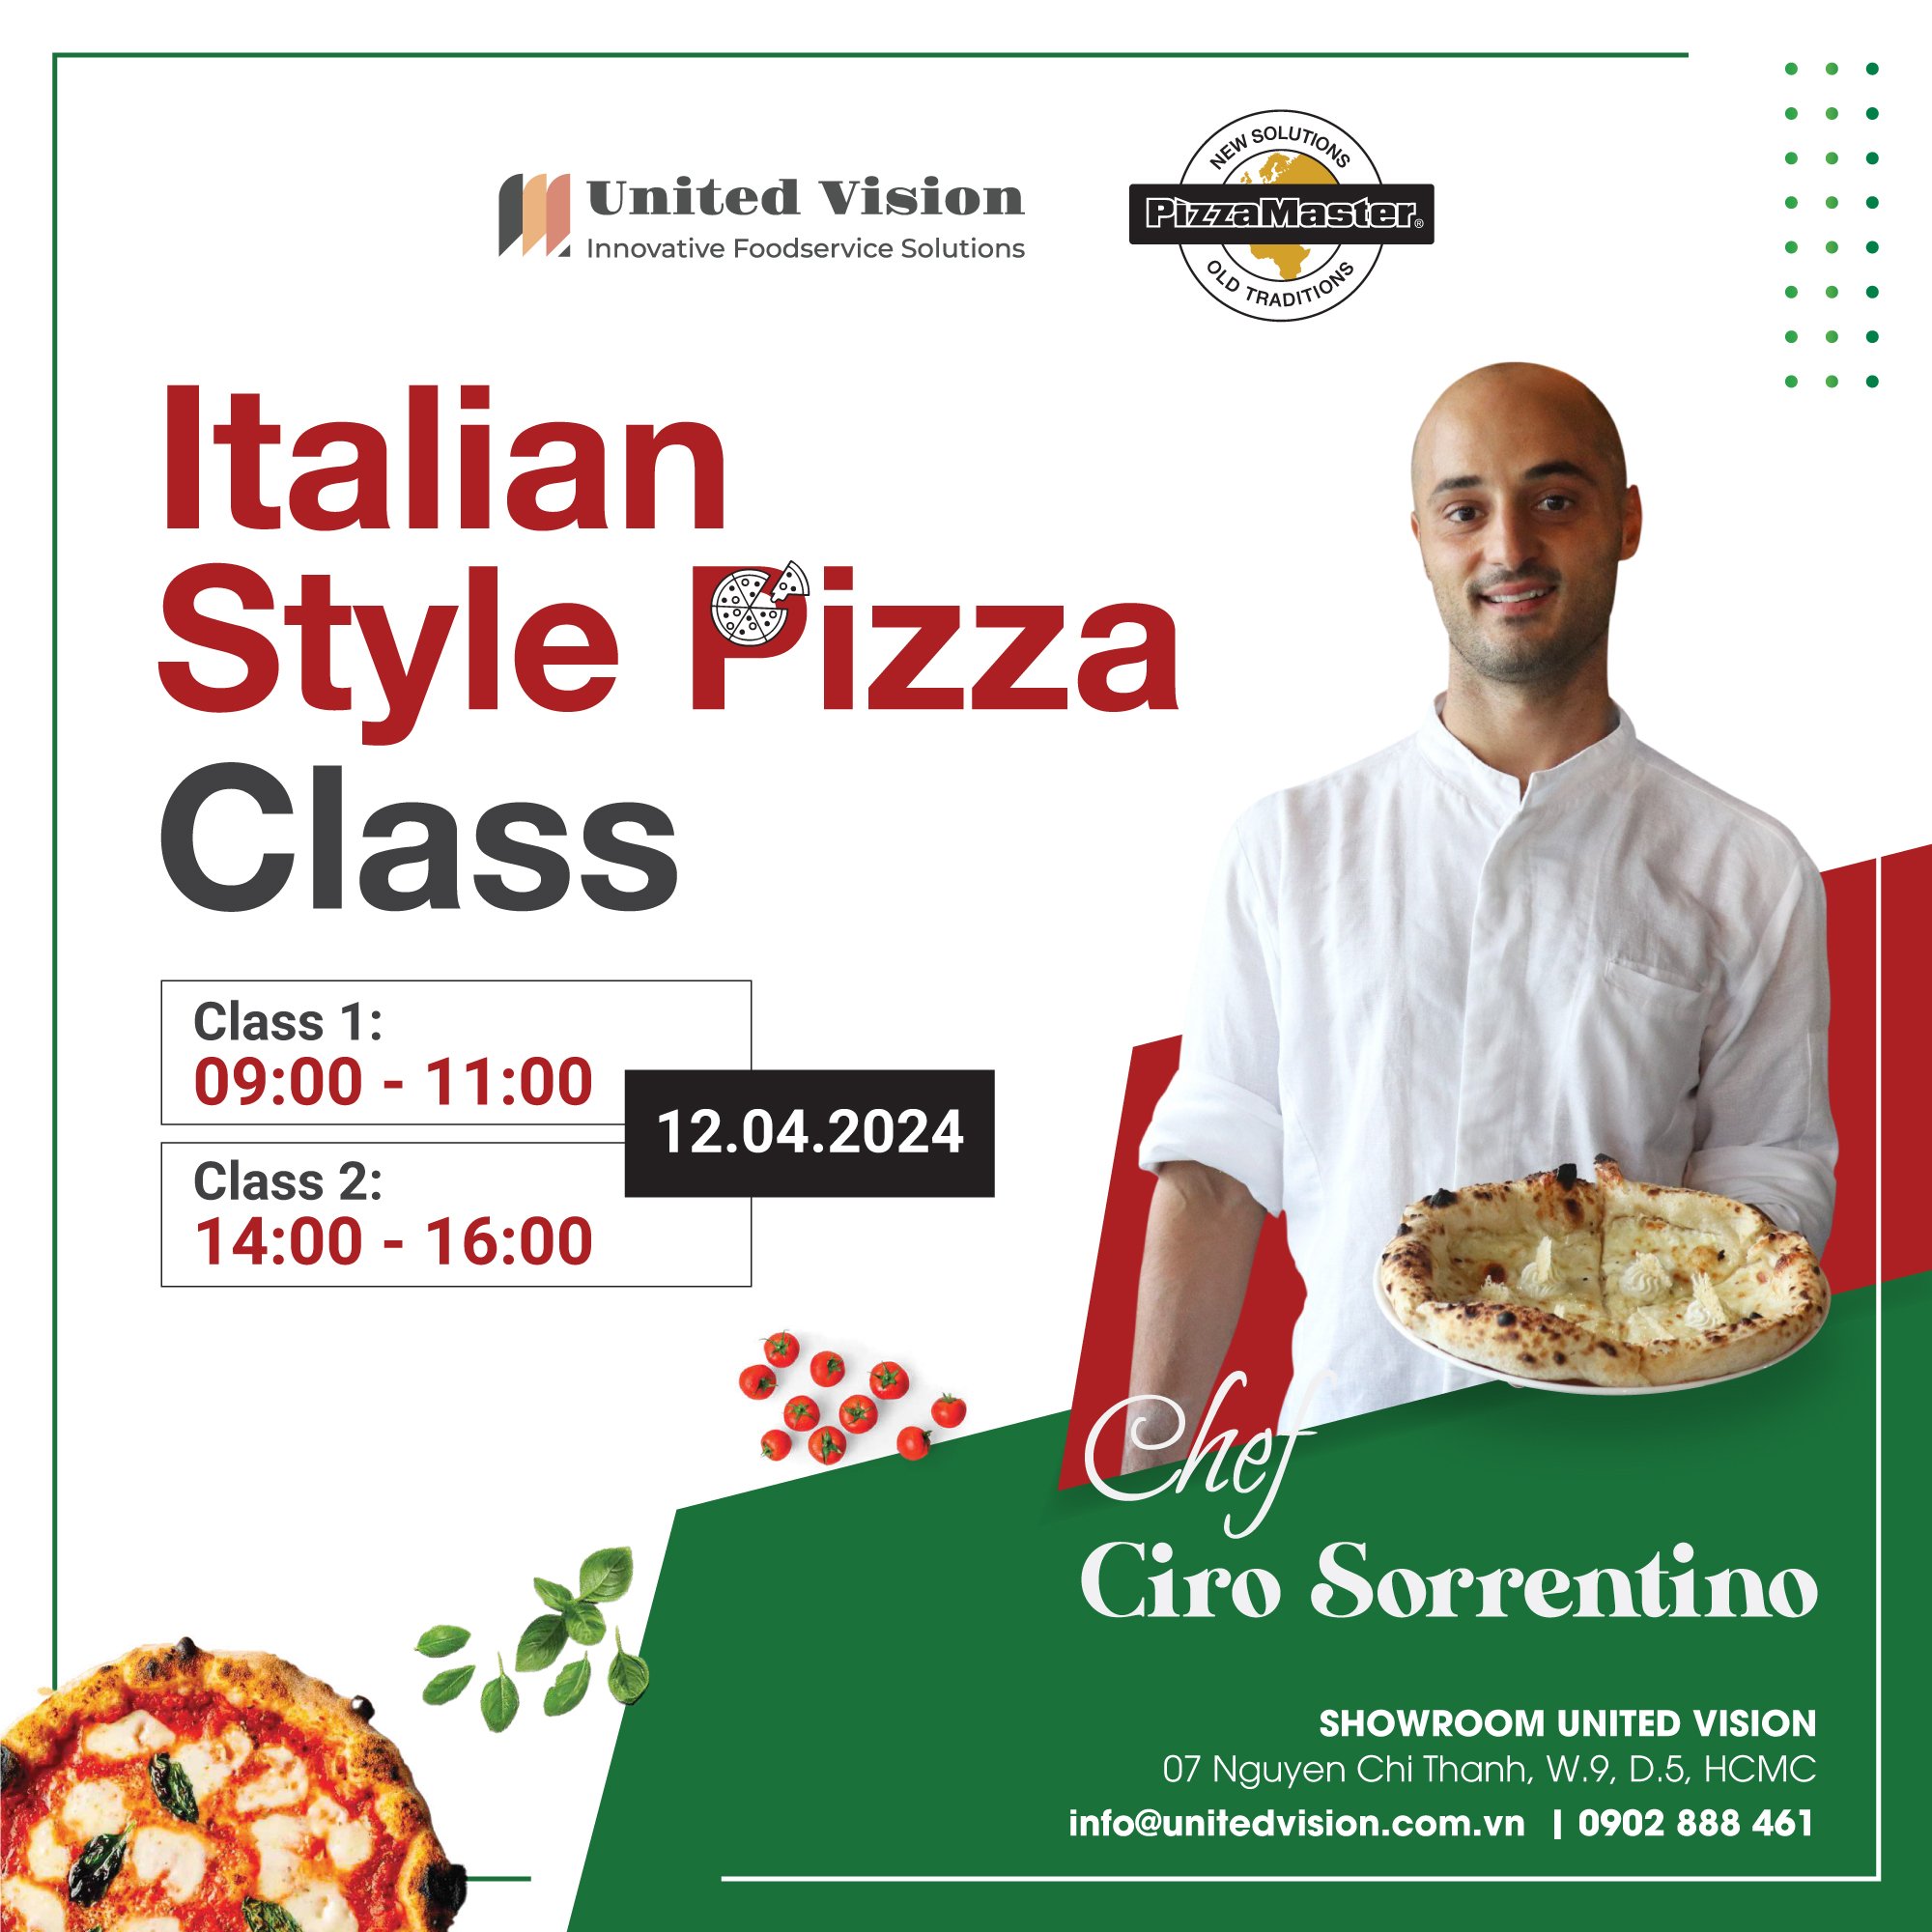 Italian Style Pizza - Learn About The Process Of Making A World-Familiar Dish